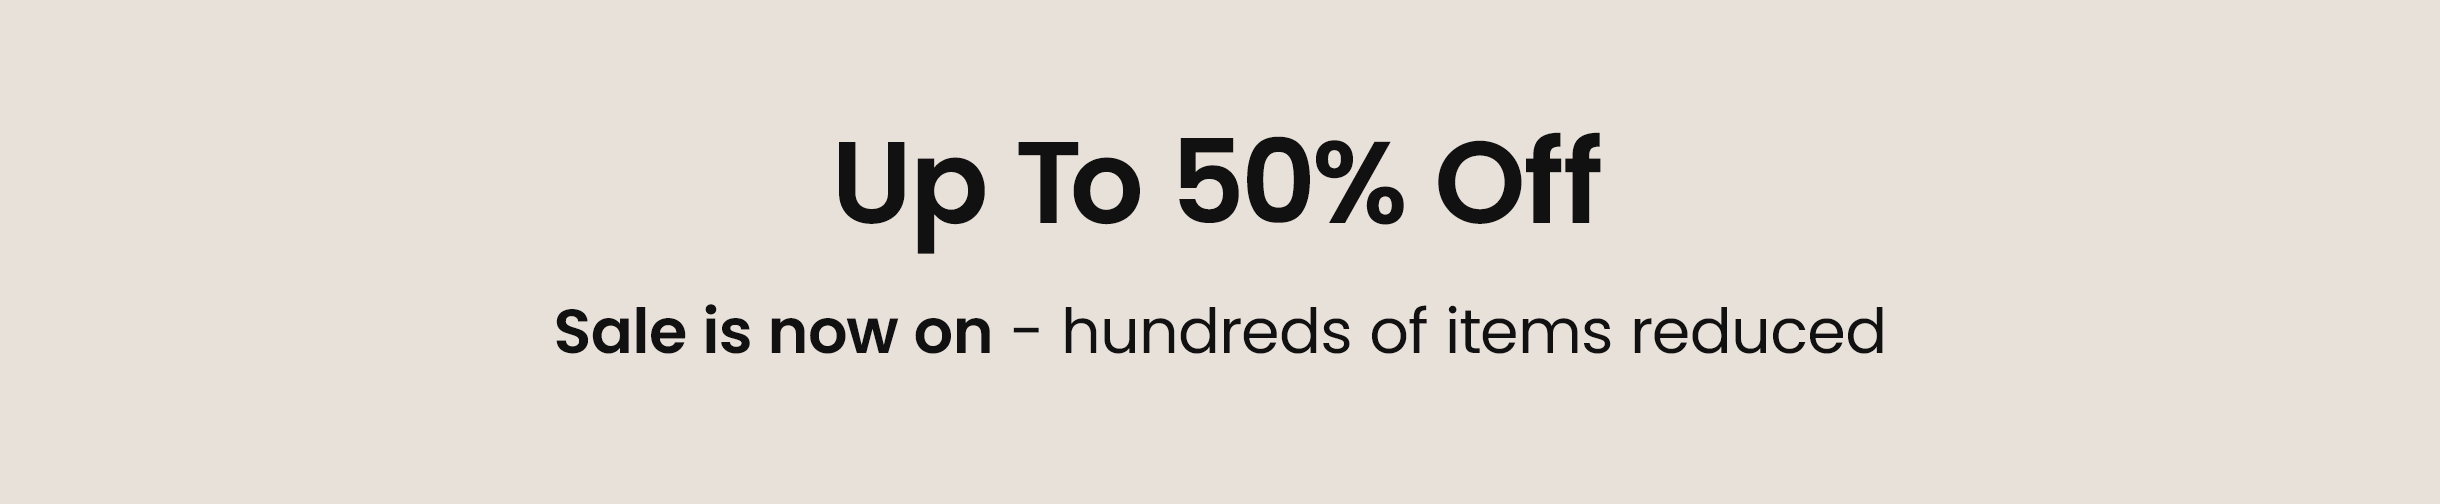 Up to 50% Off - Sale is now on - hundreds of items reduced